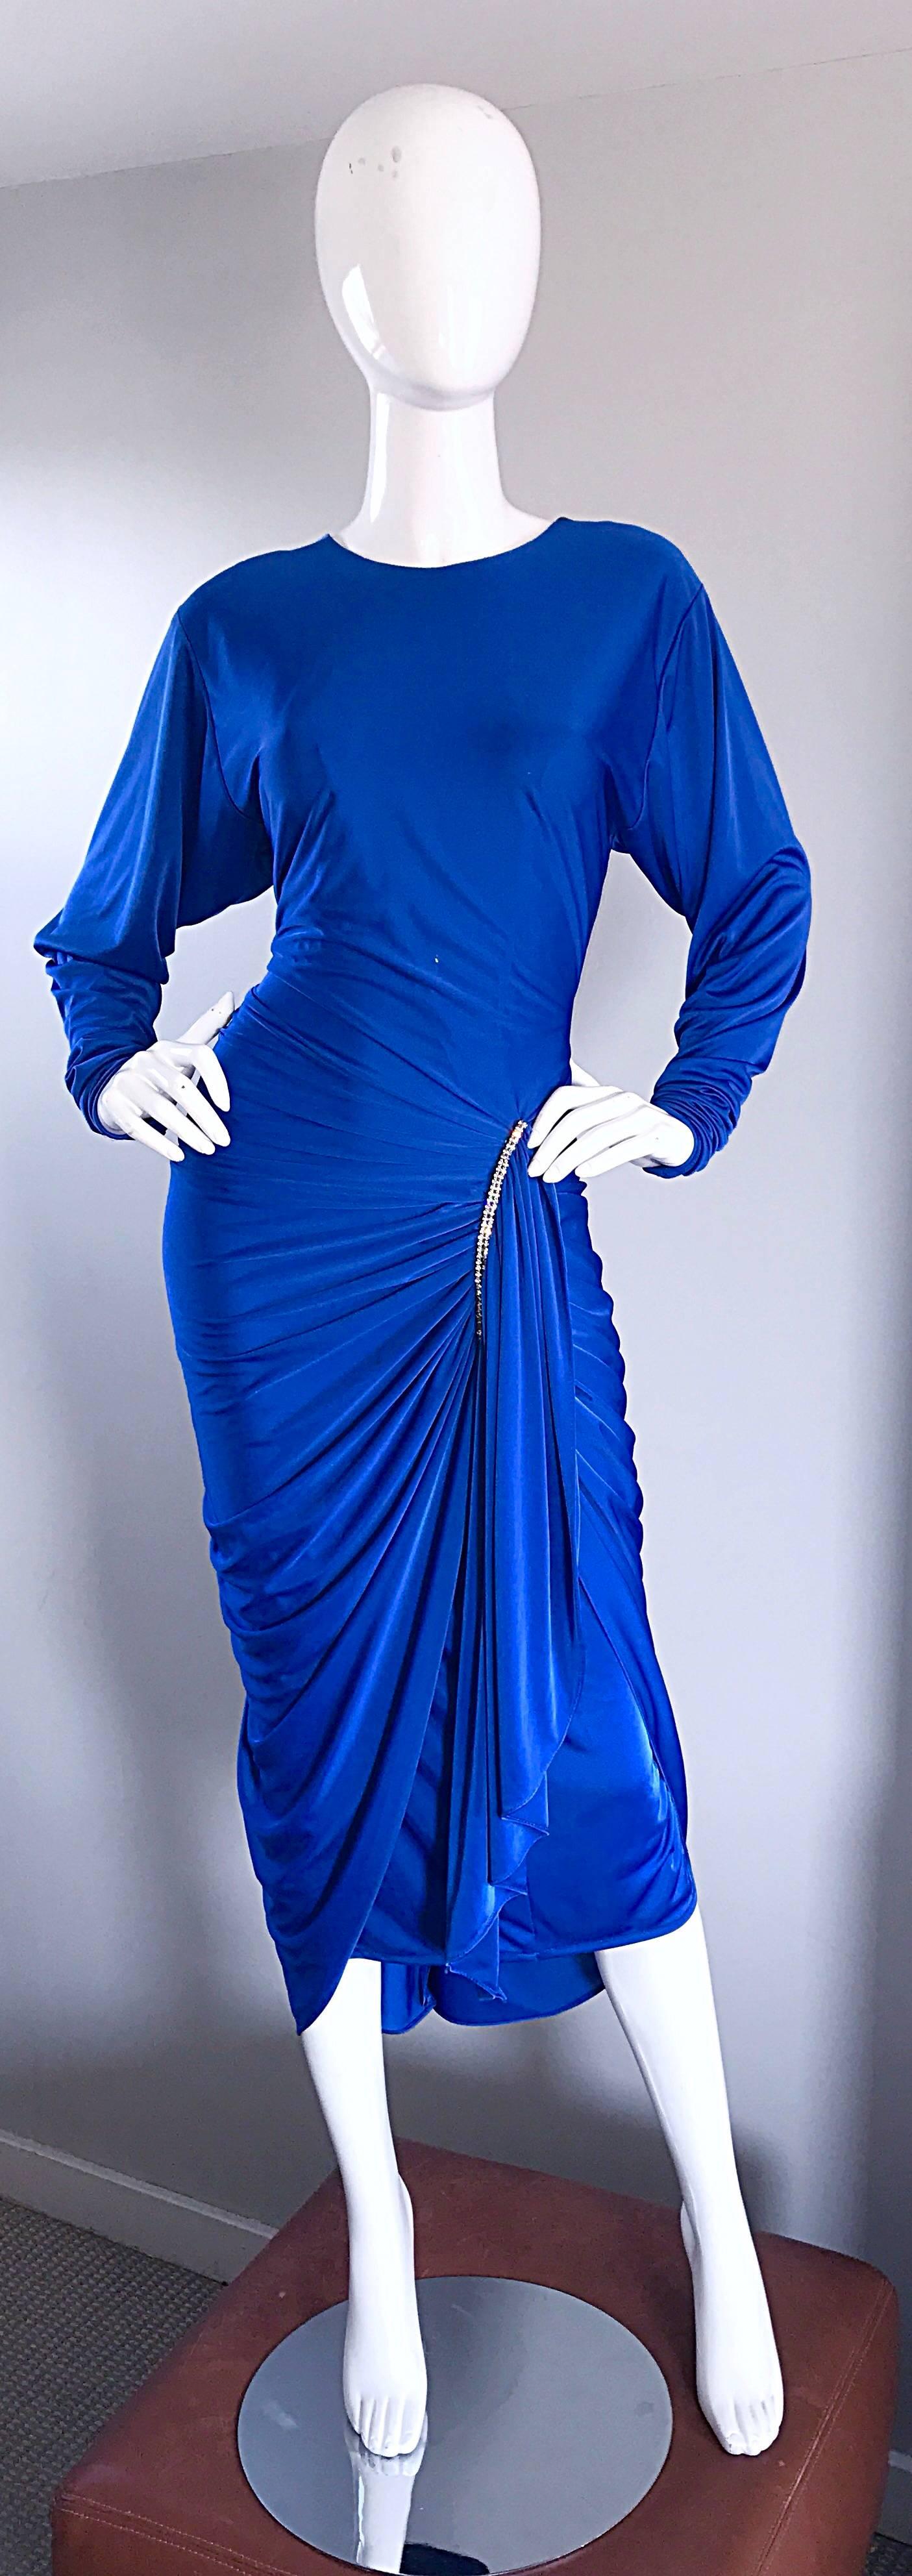 Sexy, yet sophisticated vintage late 1970s vibrant royal blue jersey disco dress! Ruched waist and skirt is very flattering, and hugs the body in all the right places. Fitted bodice, with dolman sleeves can accomodate an array of bust sizes.